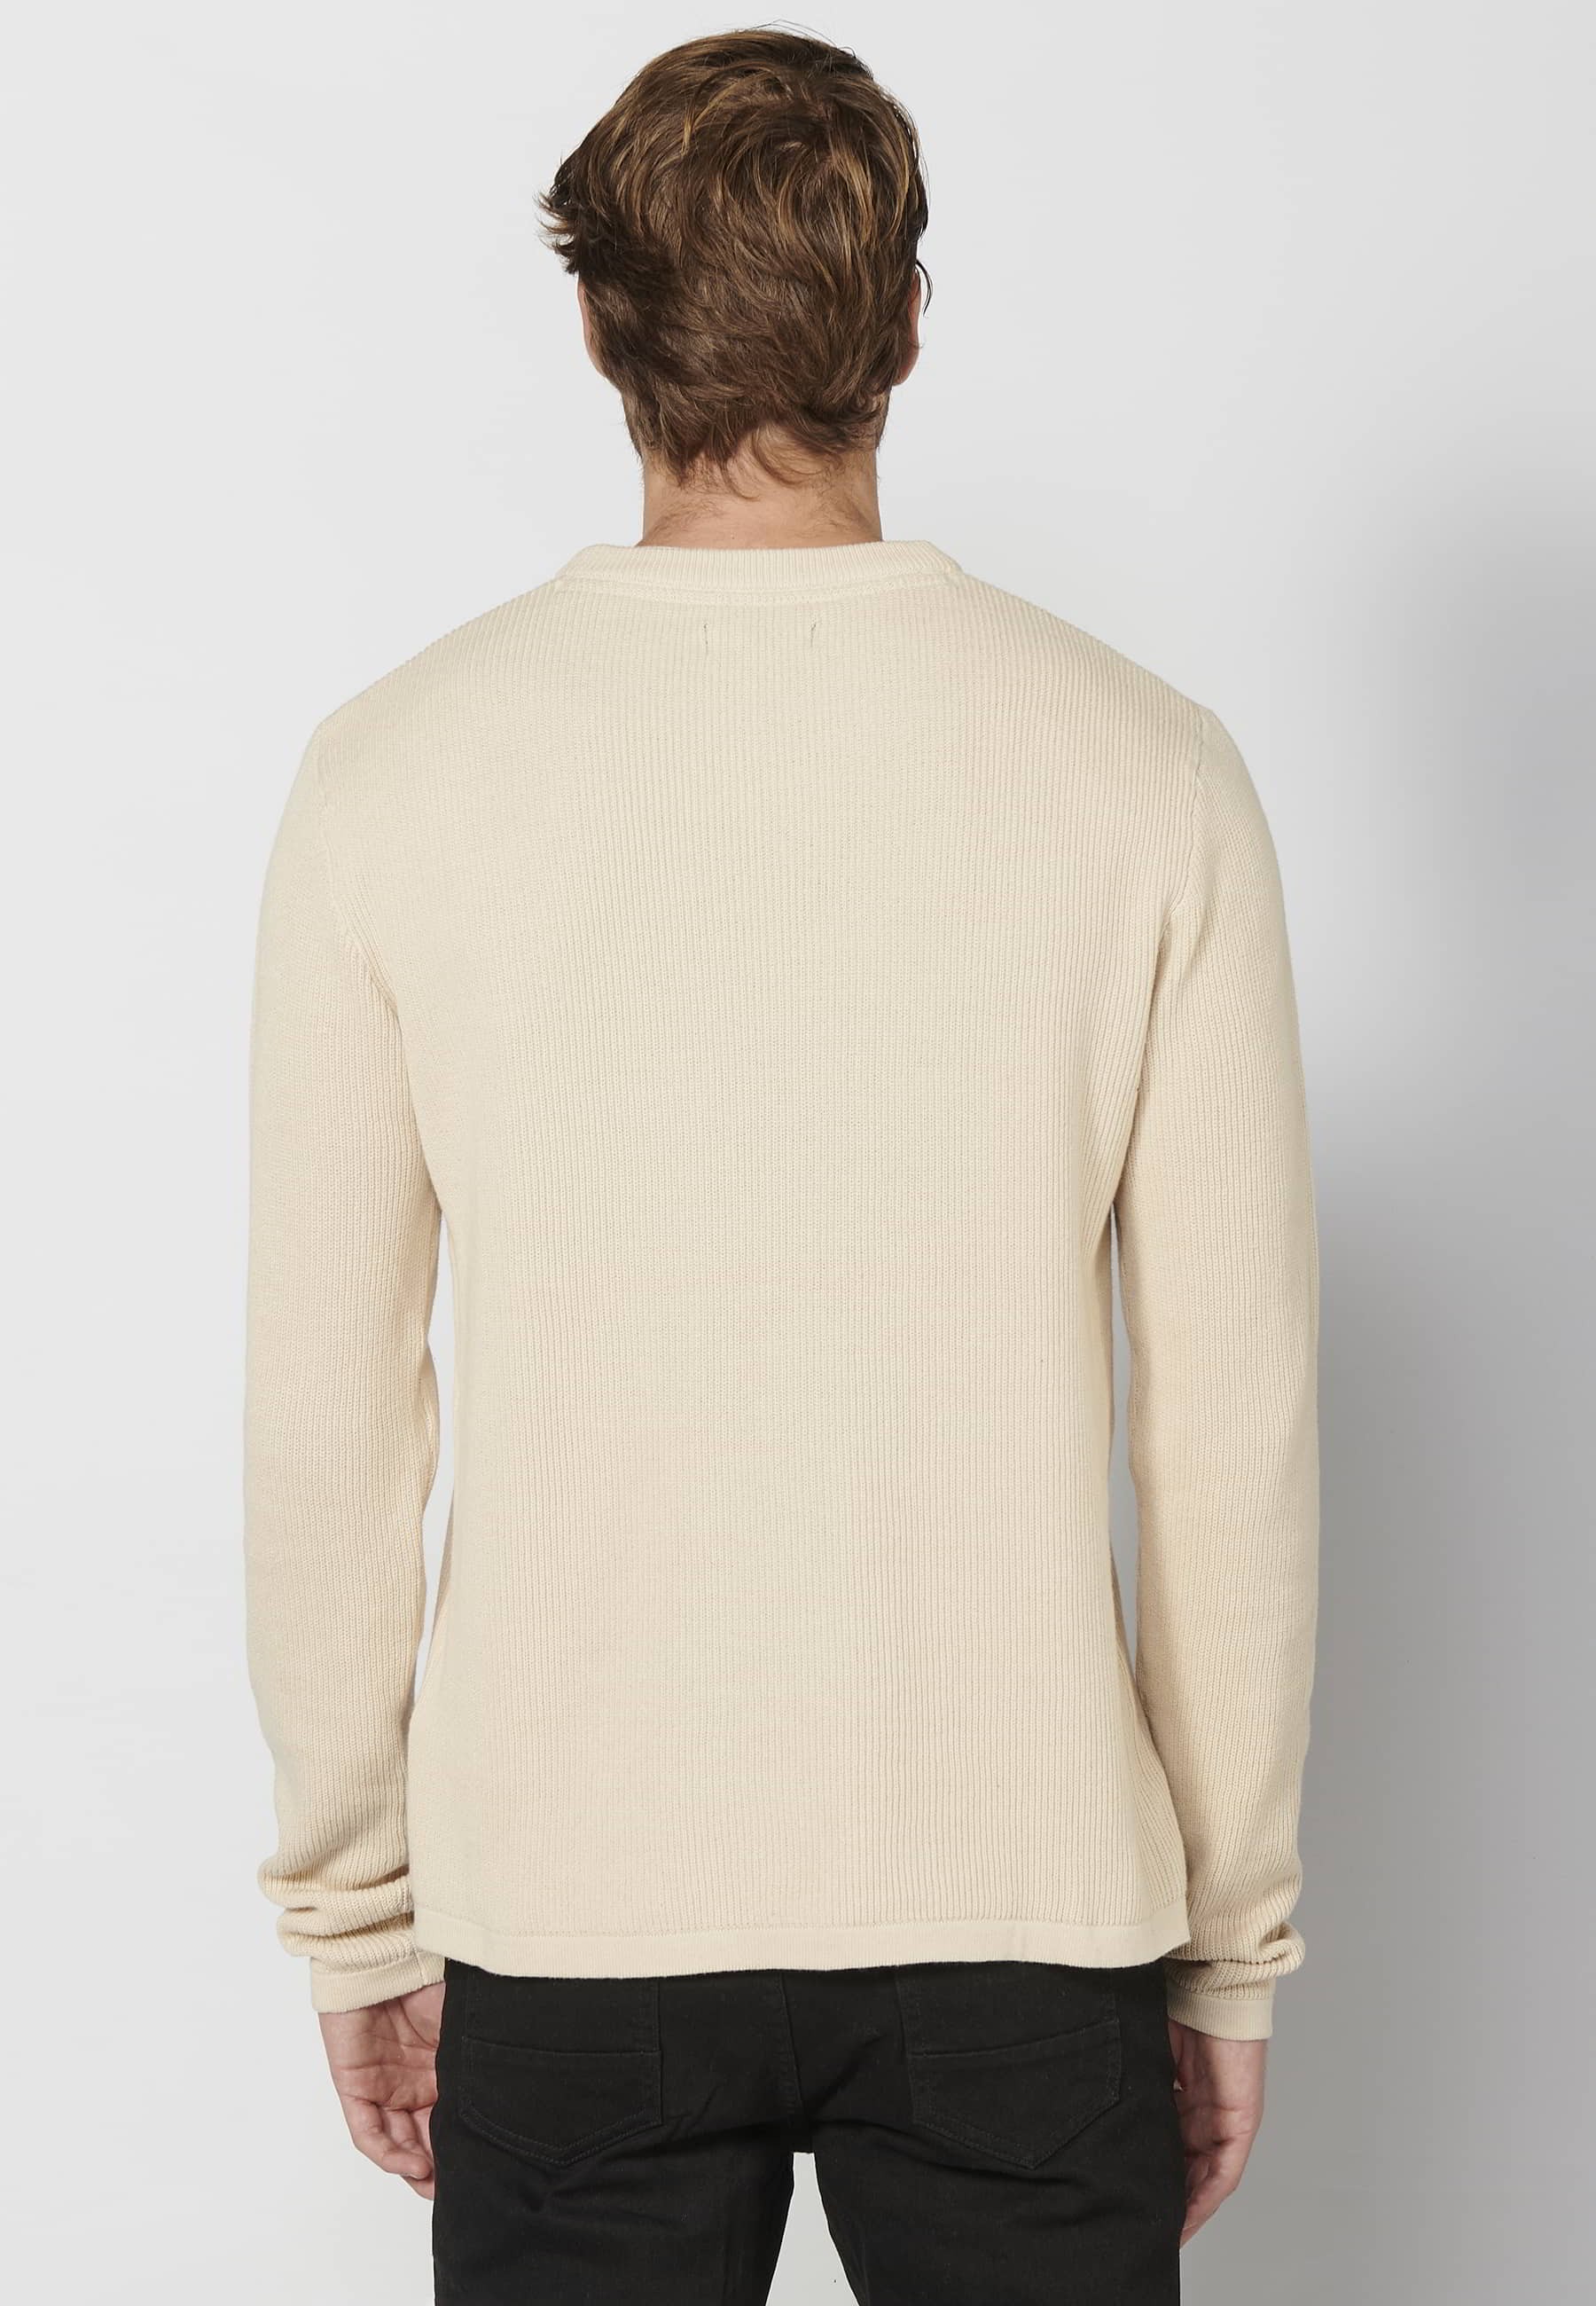 Long-sleeved cotton tricot sweater with embroidered detail in Cream color for Men 3